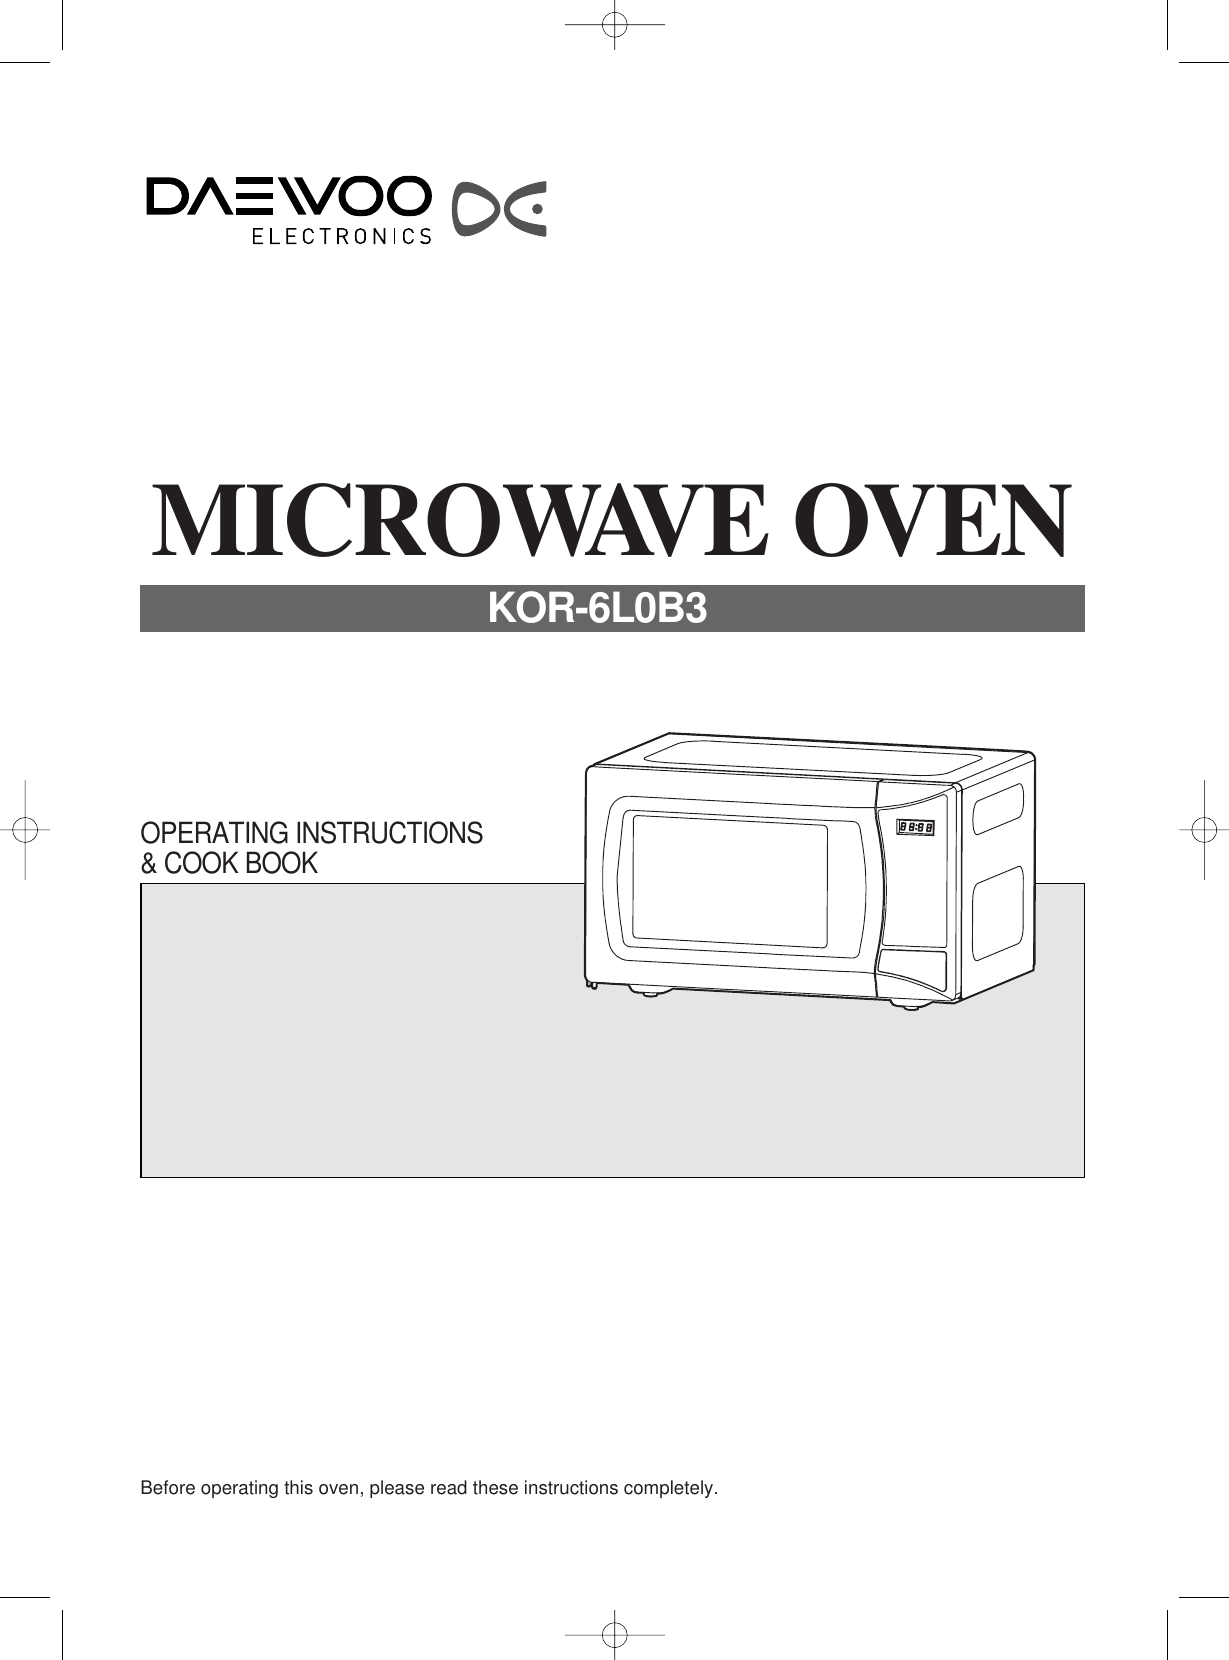 Before operating this oven, please read these instructions completely.OPERATING INSTRUCTIONS&amp; COOK BOOKMICROWAVE OVENKOR-6L0B3